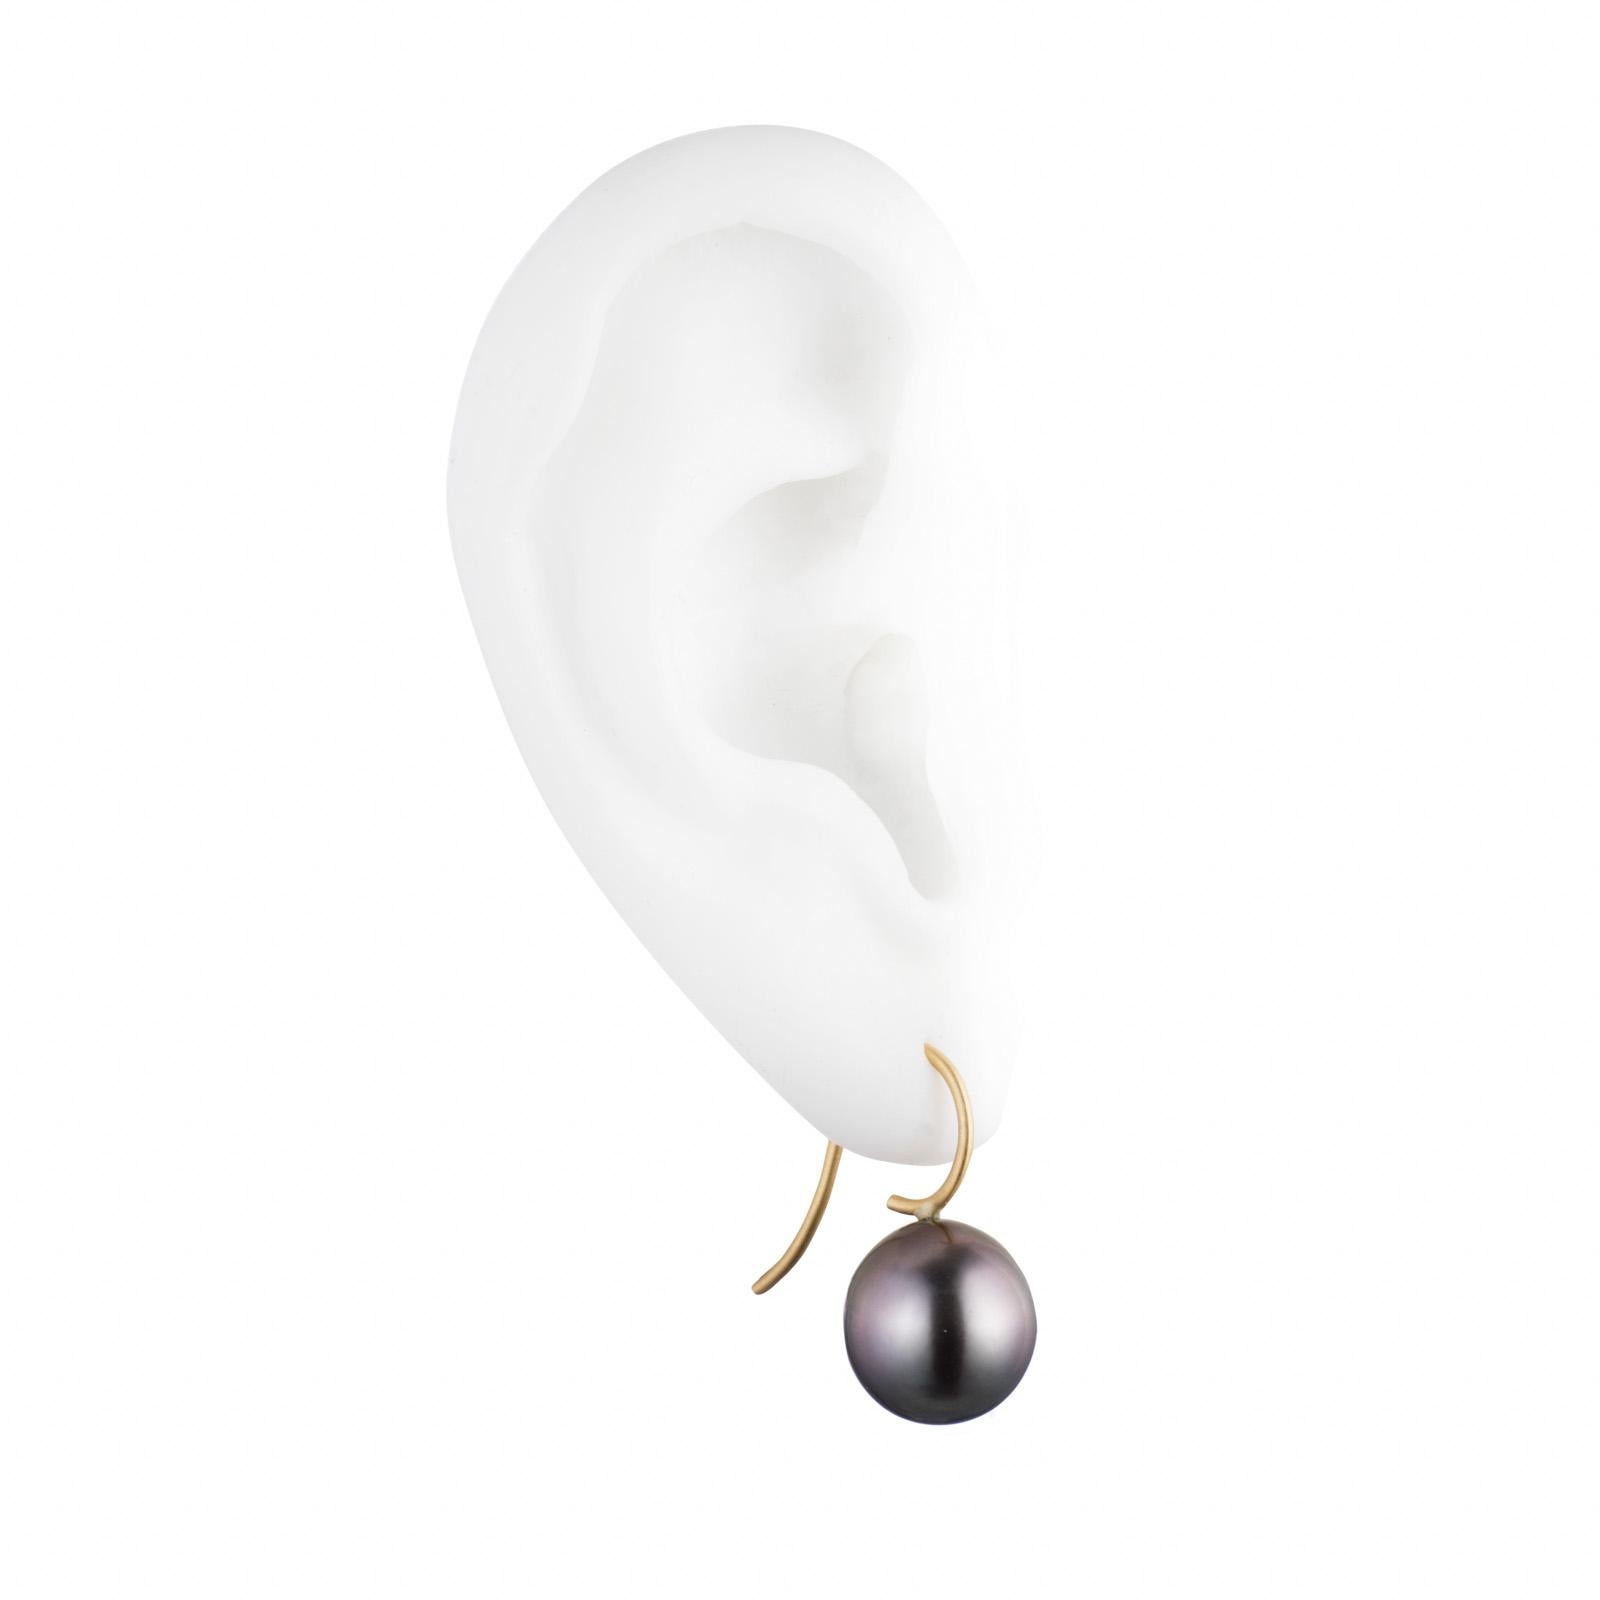 Simply elegant Tahitian cultured pearls suspended from 18K gold ear wires. Handmade in NYC.

Description:
These pearls are round to very slightly oval in shape and measure approximately 12.00 mm.

One photo features multiple earrings. This listing